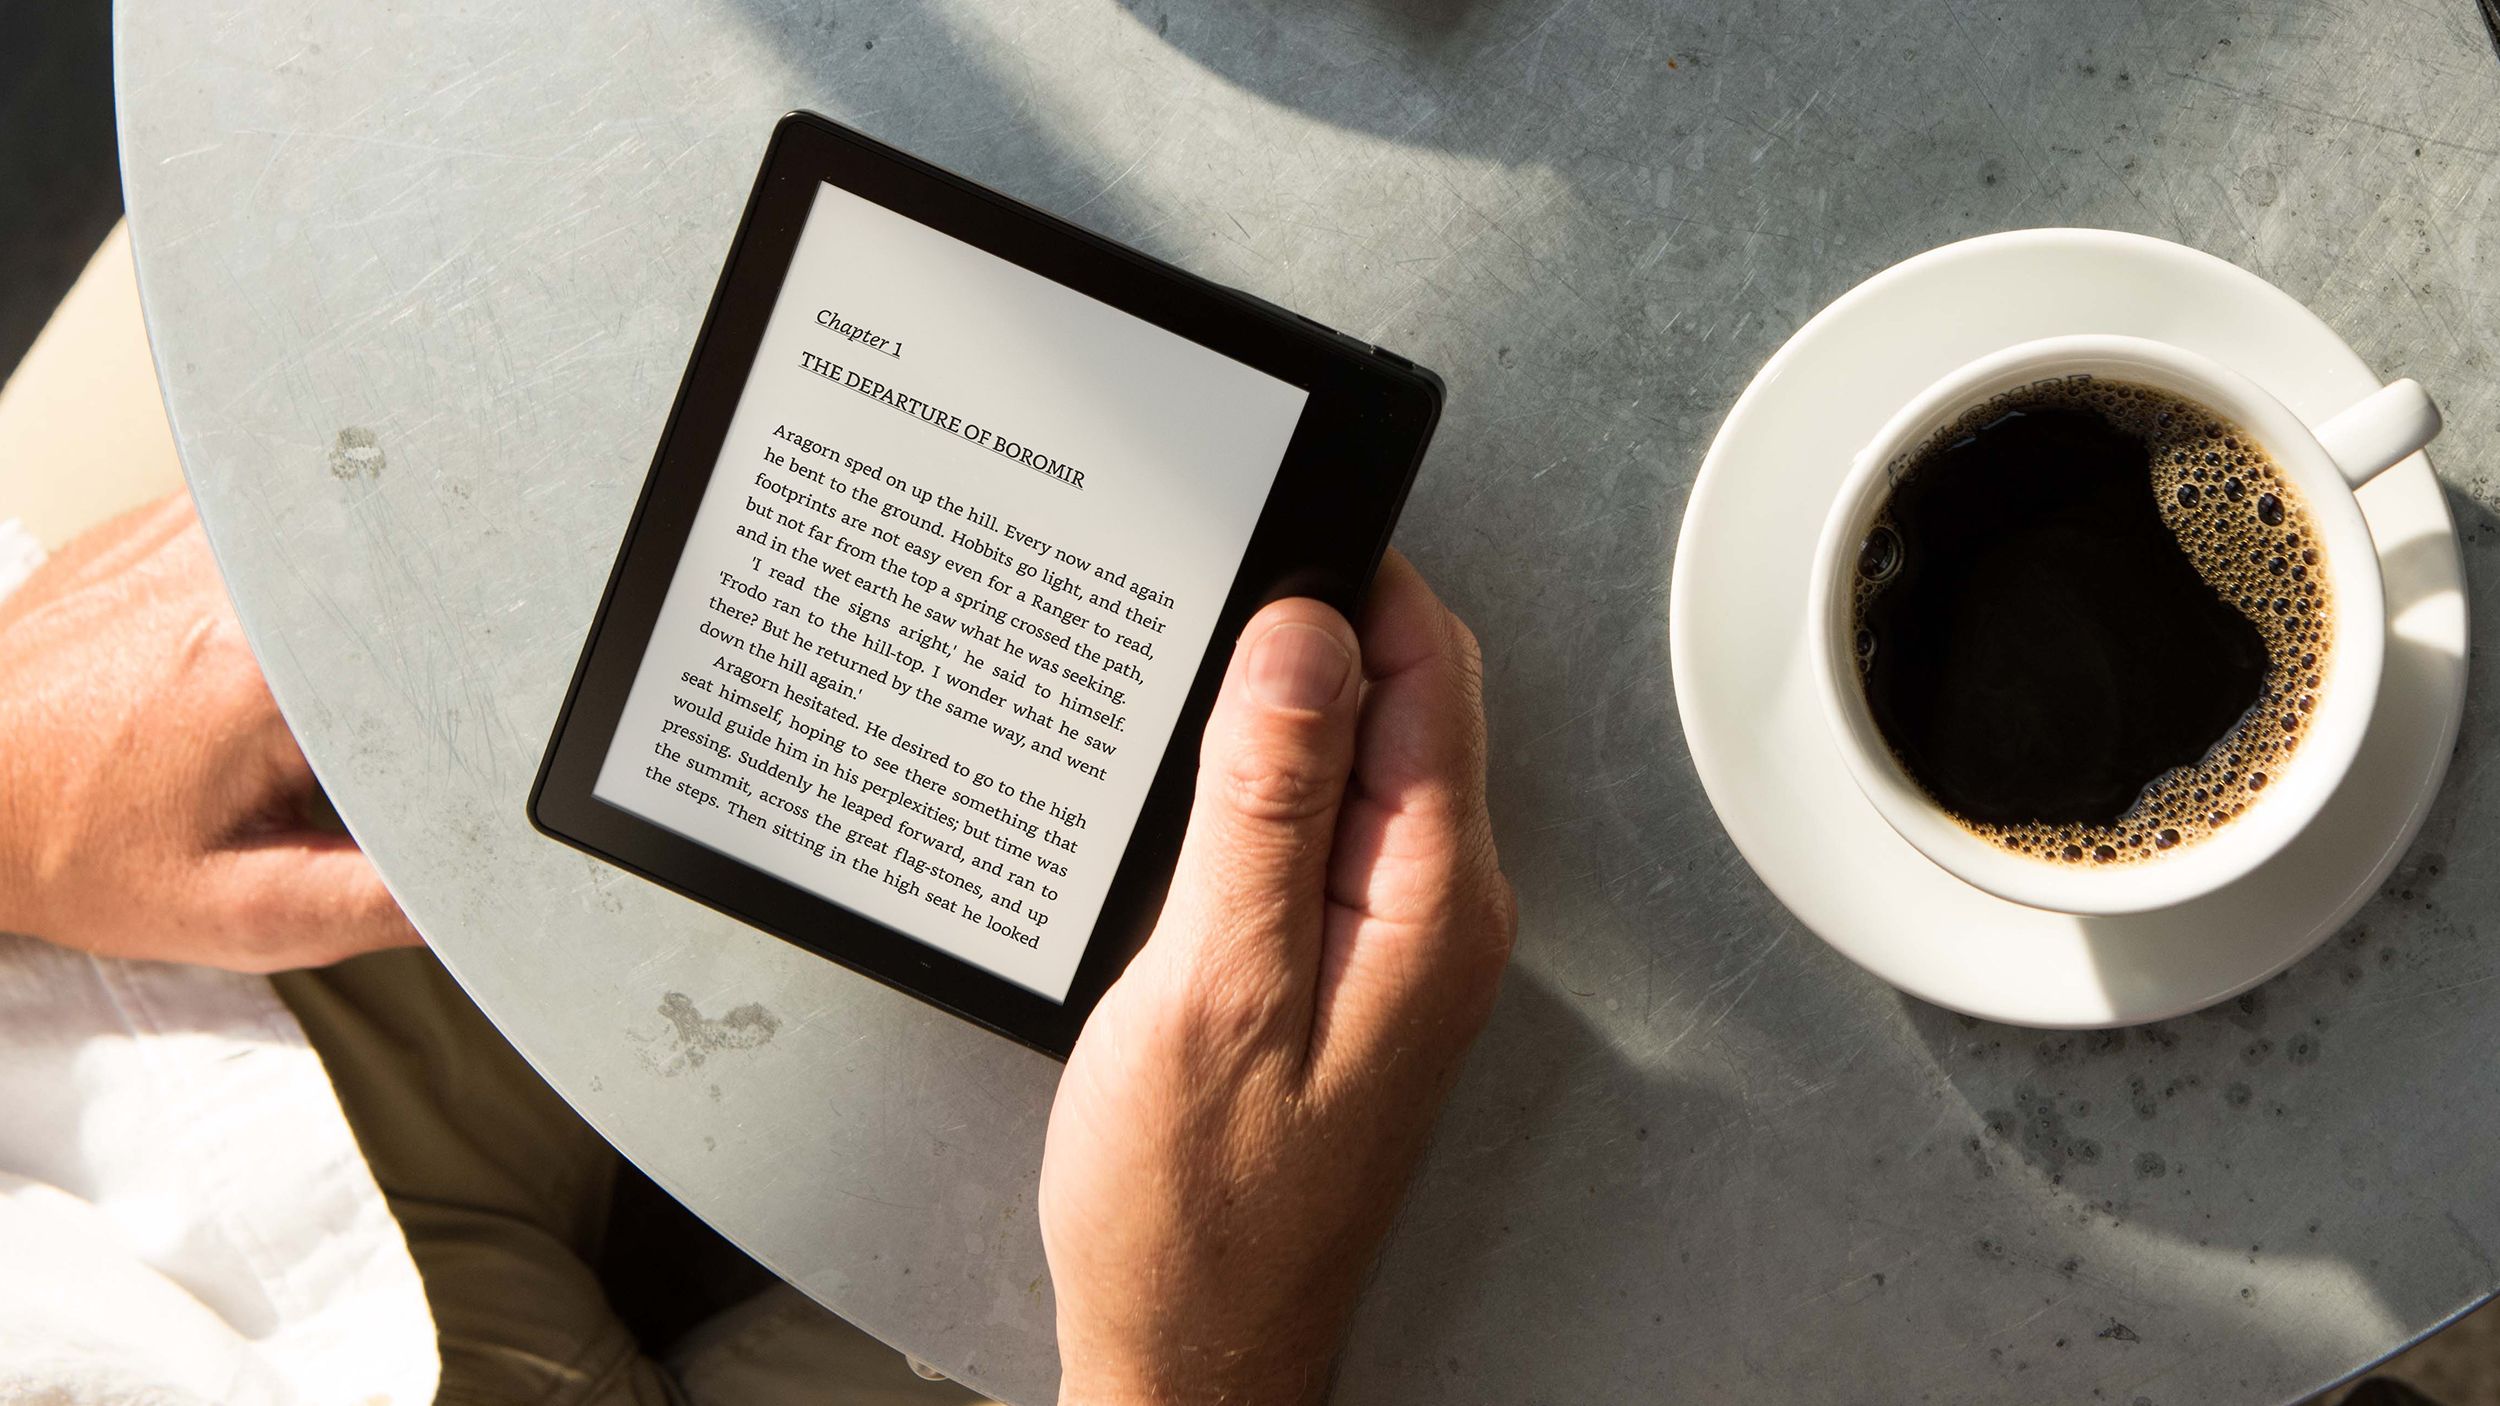 Snag  Fire Tablets and Kindle E-Readers From $20 at Woot